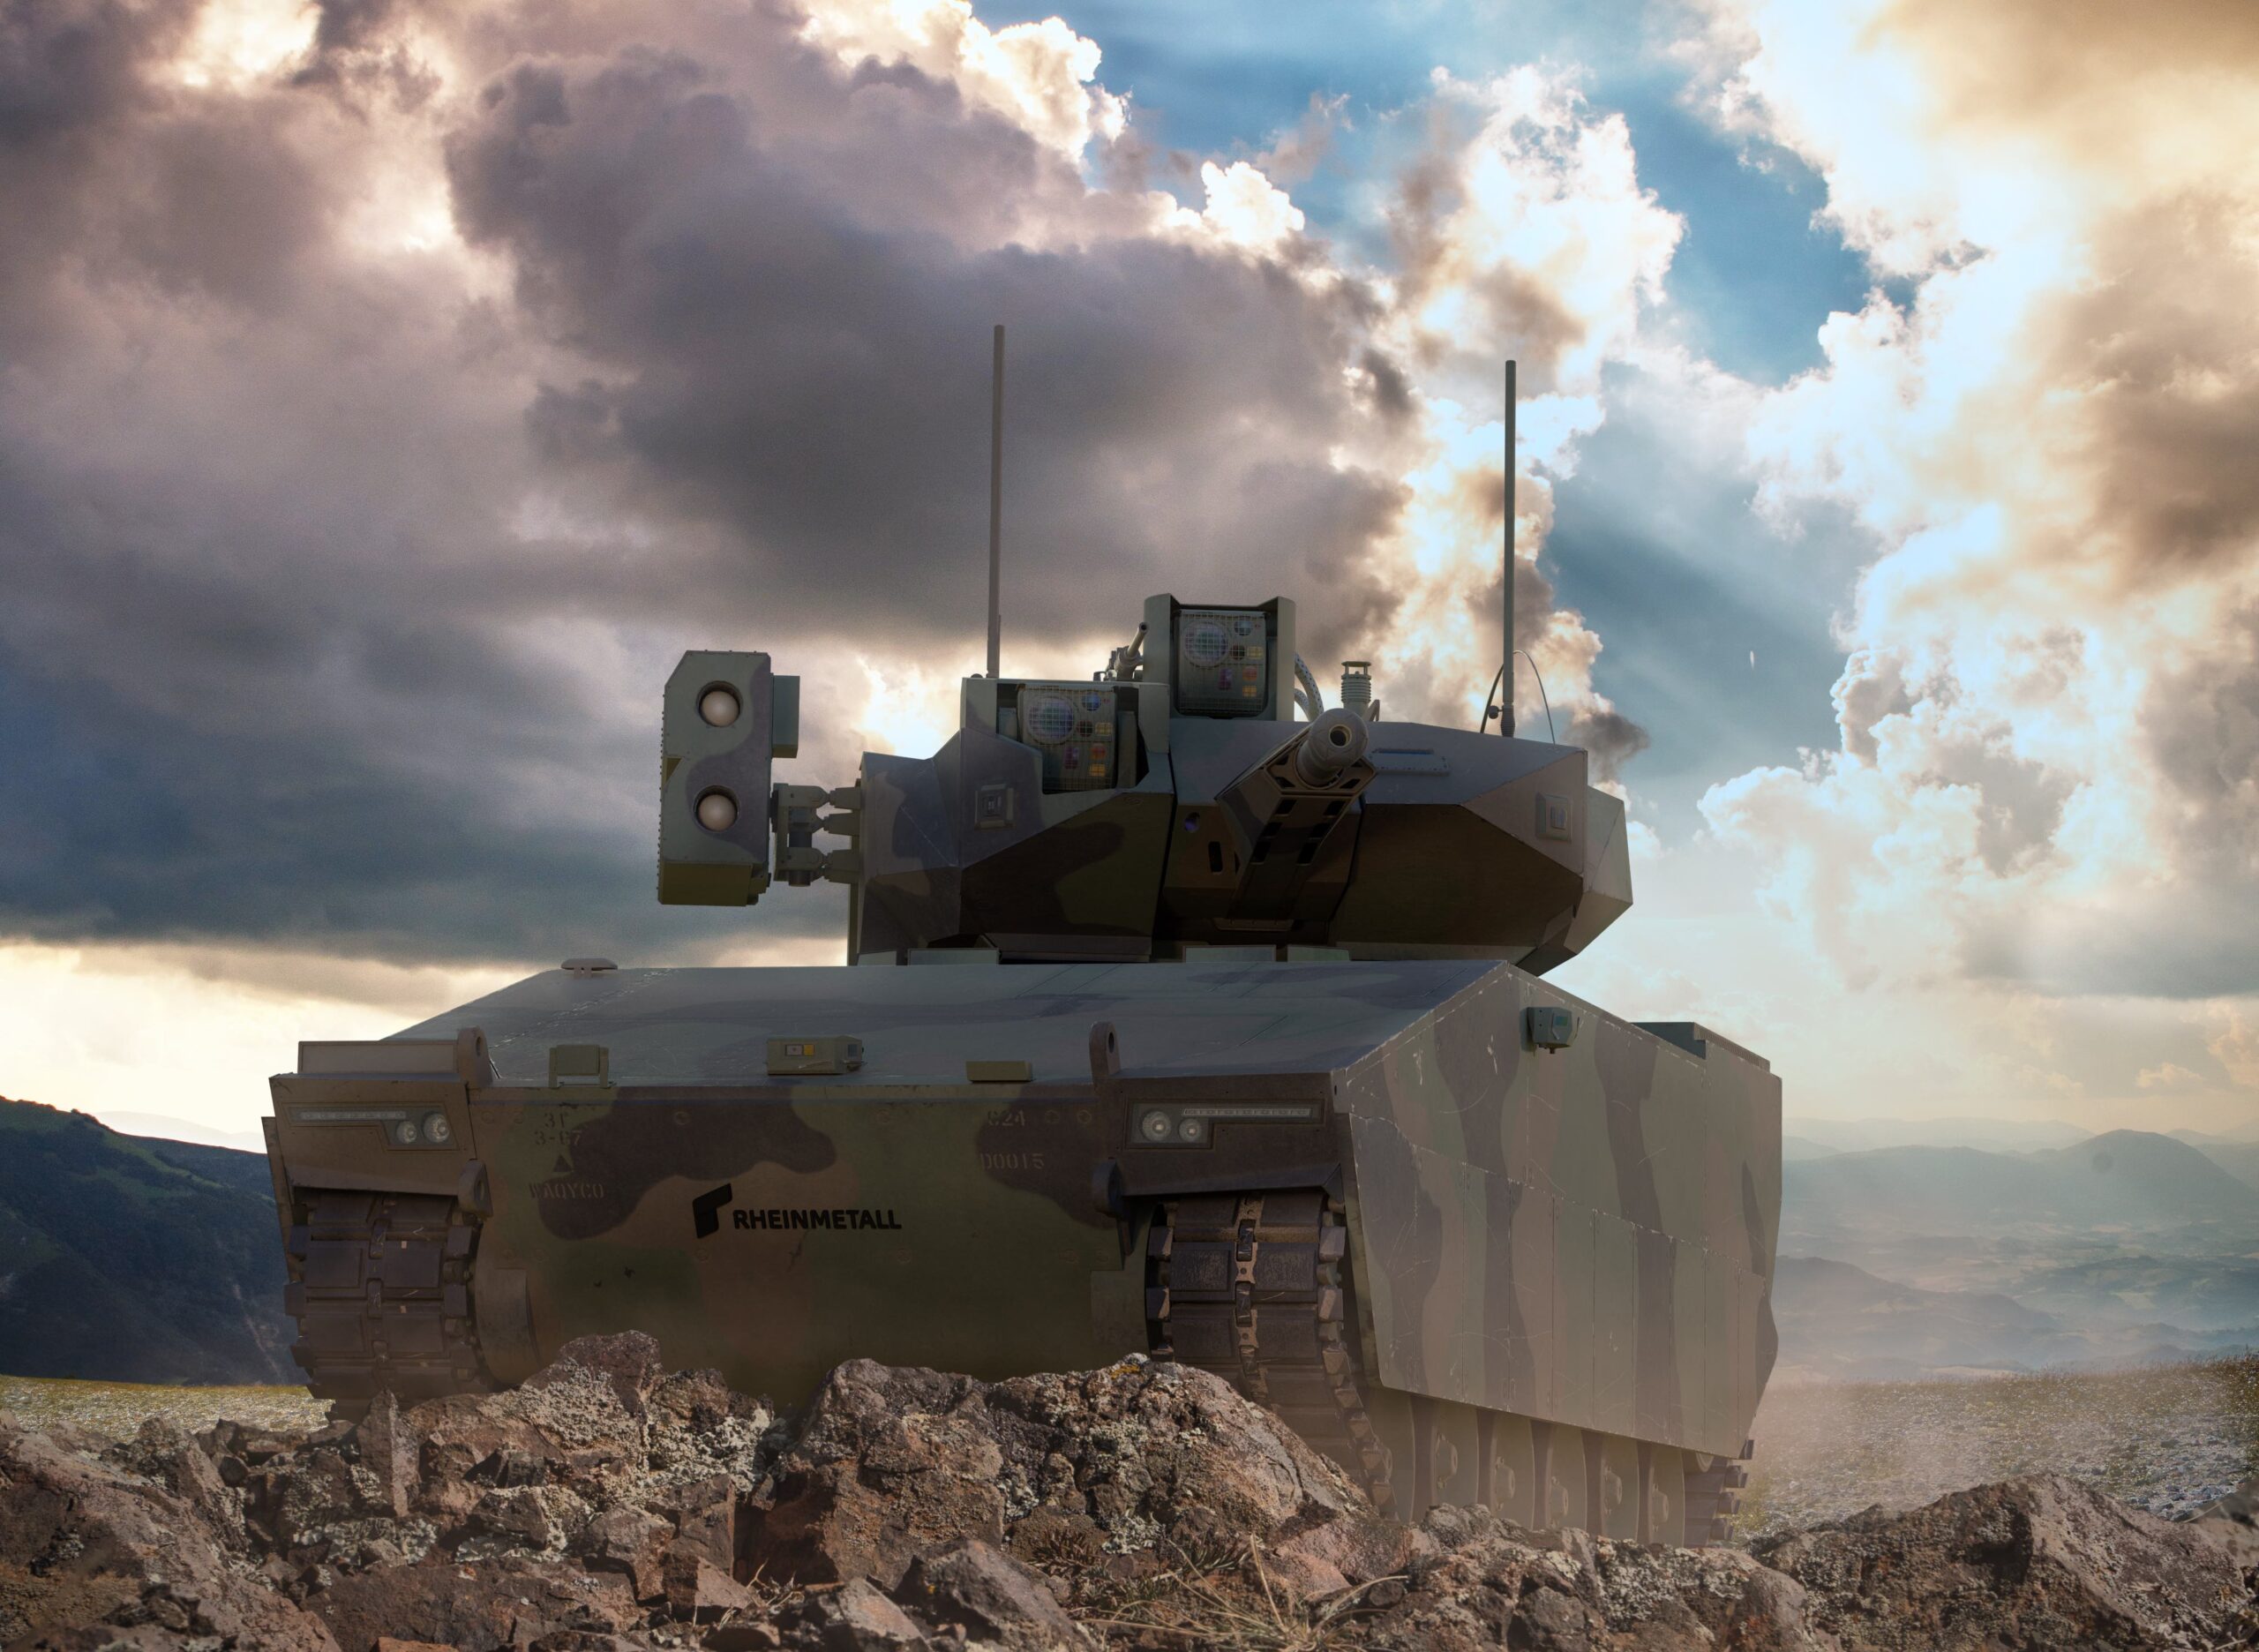 This Futuristic Unmanned Tank Could Be A Game Changer For The US Army